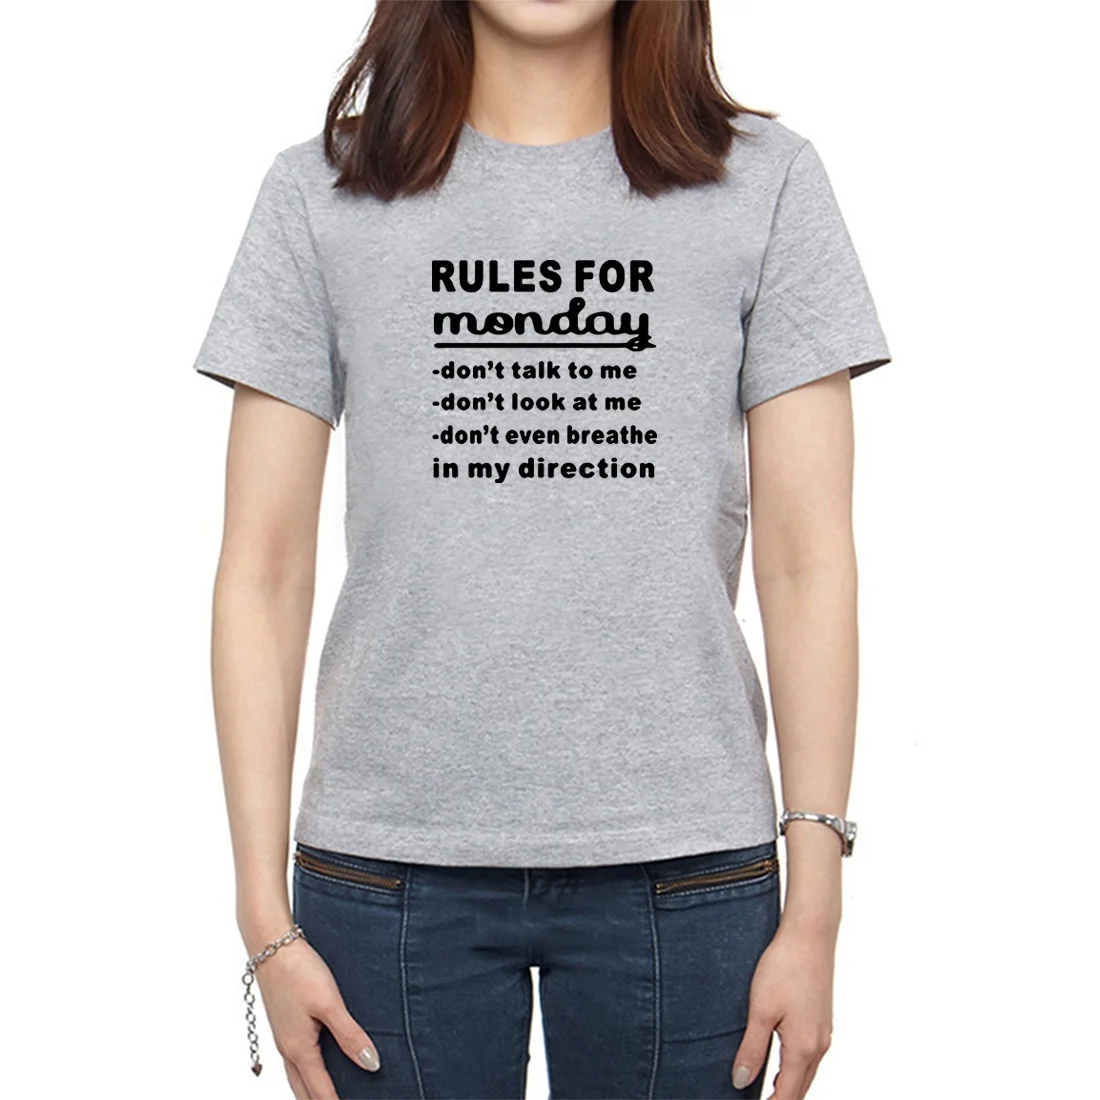 

Rules for Monday Funny T Shirts Women Printed Short Sleeve Cotton Tee Shirt Femme Black White O-neck Loose Tshirt Women Top